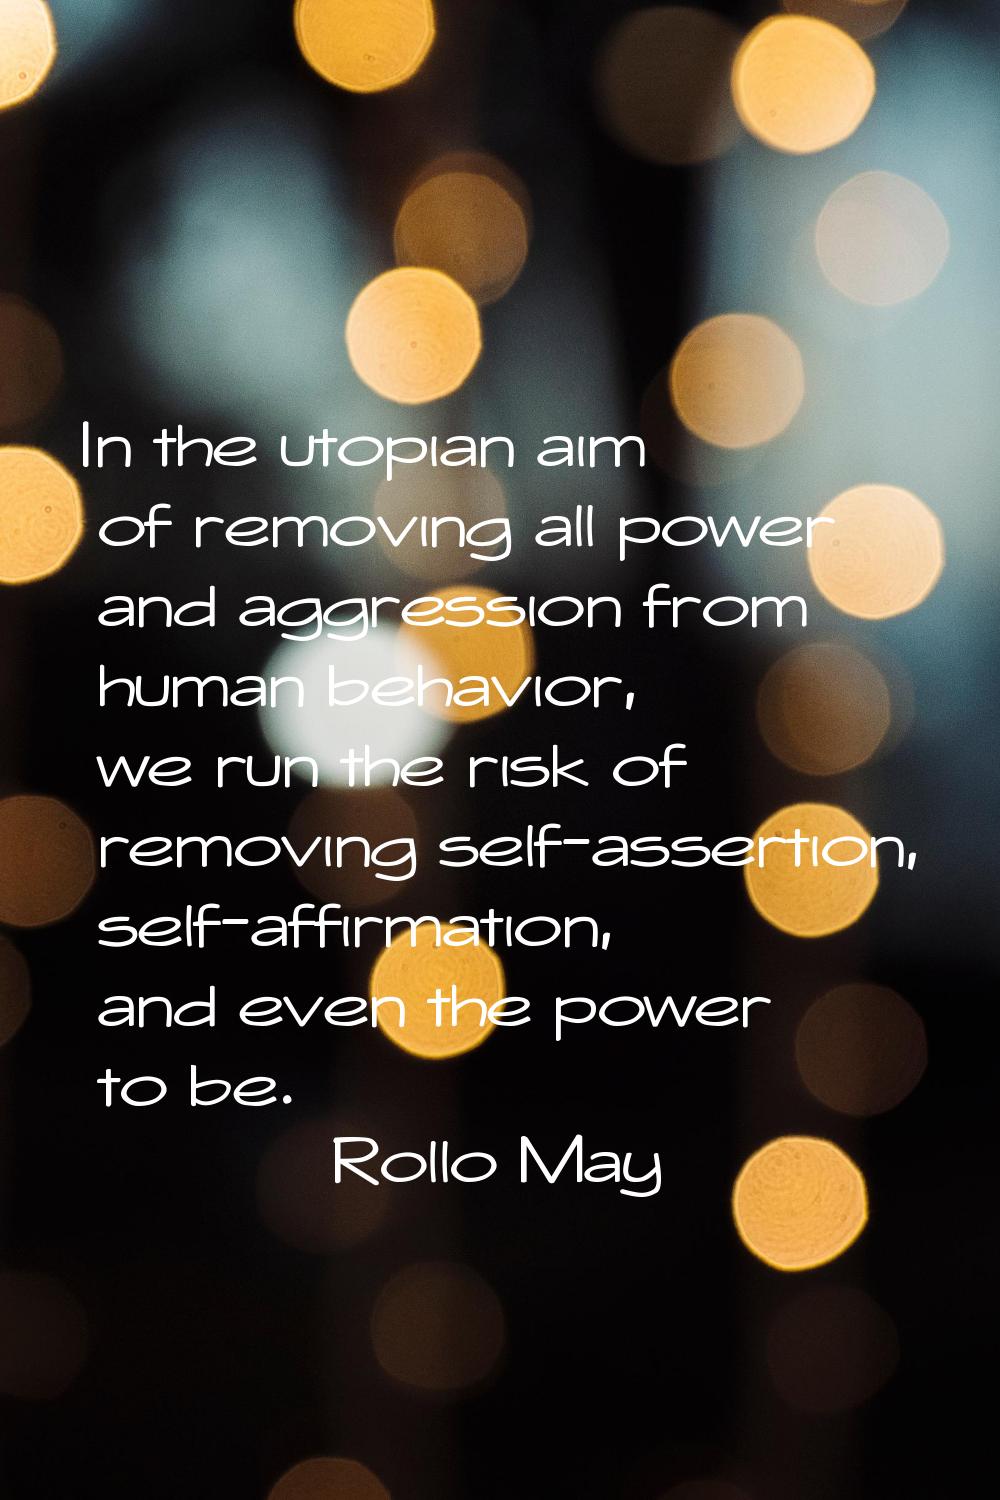 In the utopian aim of removing all power and aggression from human behavior, we run the risk of rem